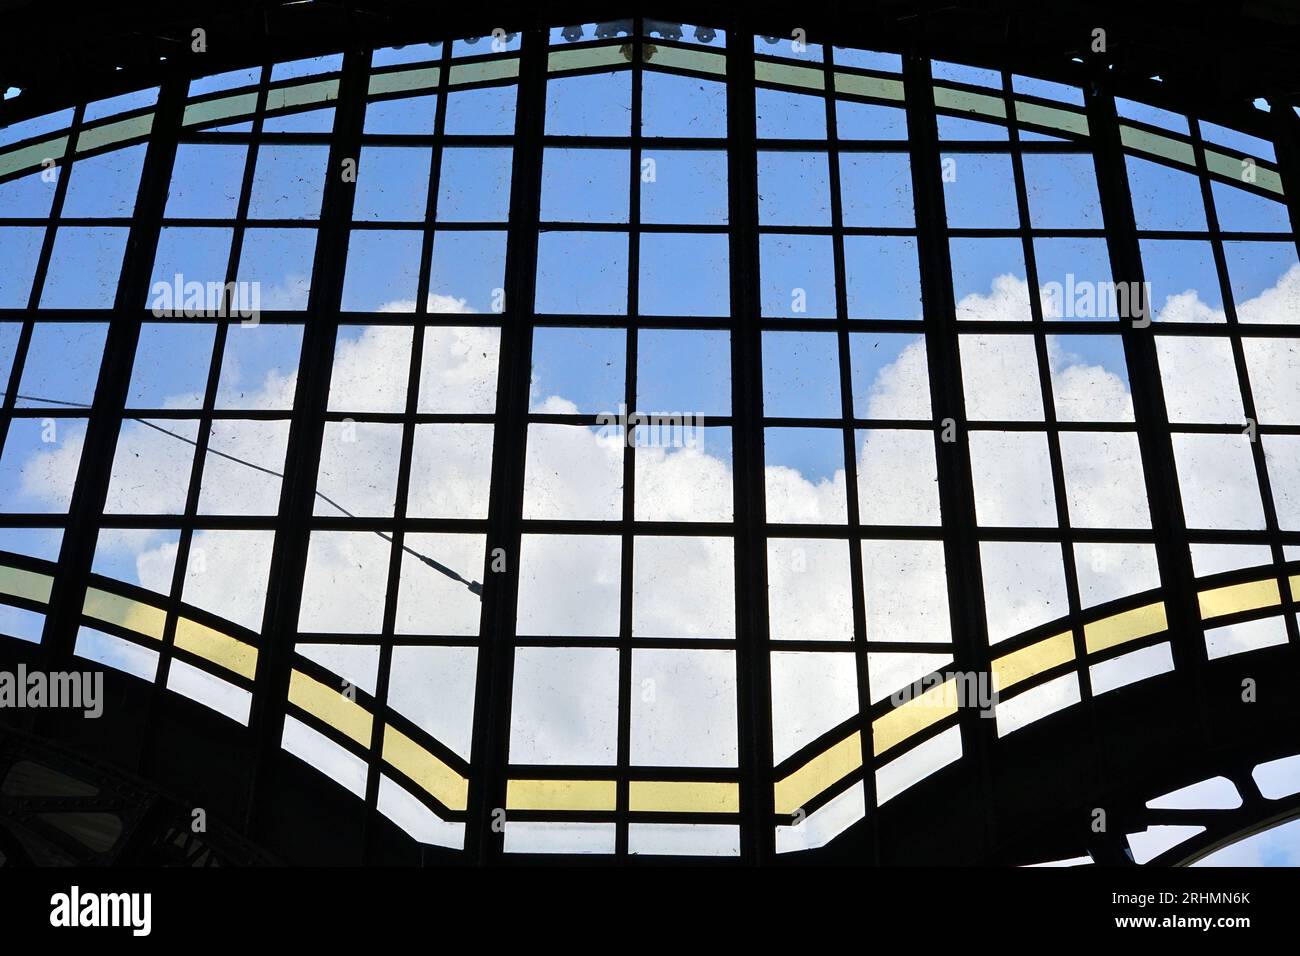 Den Bosch, Netherlands - August 15, 2023: Stained glass in the 19th century canopy at the railway station in 's-Hertogenbosch (Den Bosch) Stock Photo